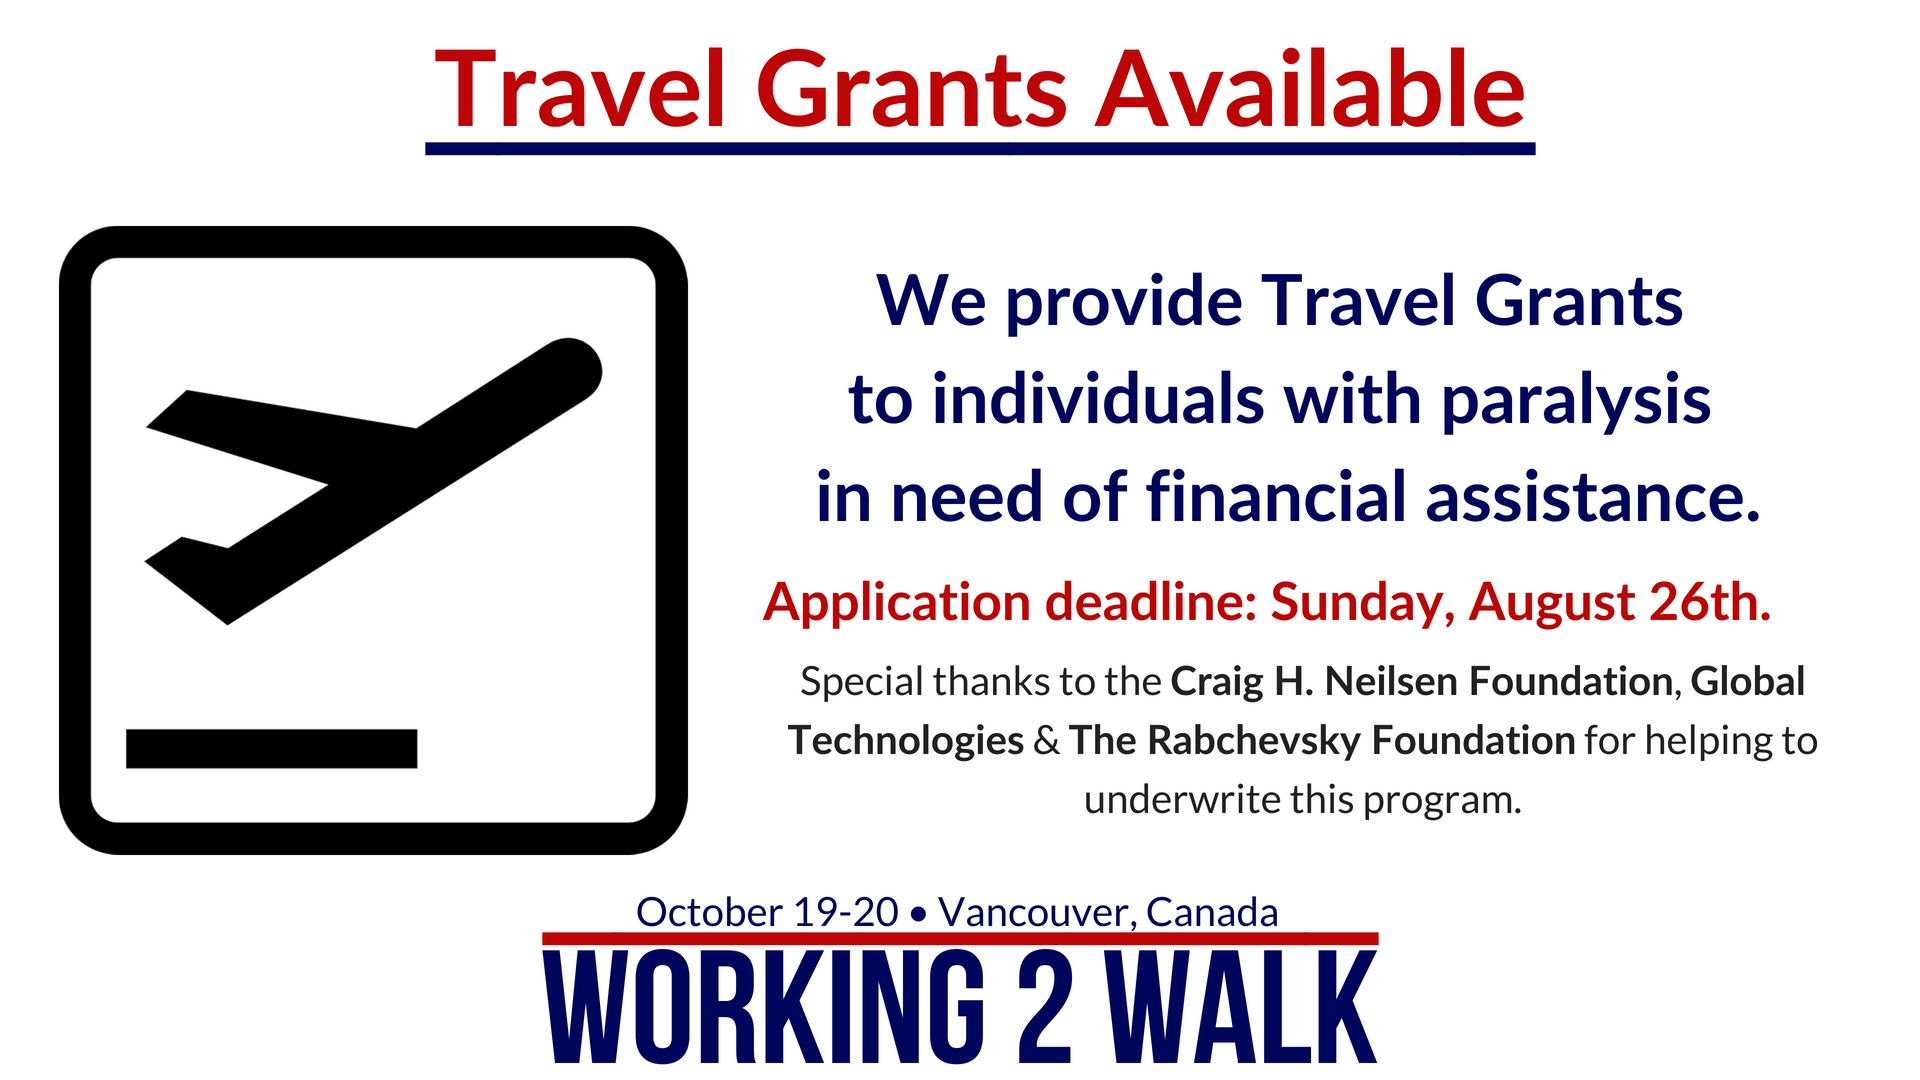 Travel Grants for Working 2 Walk